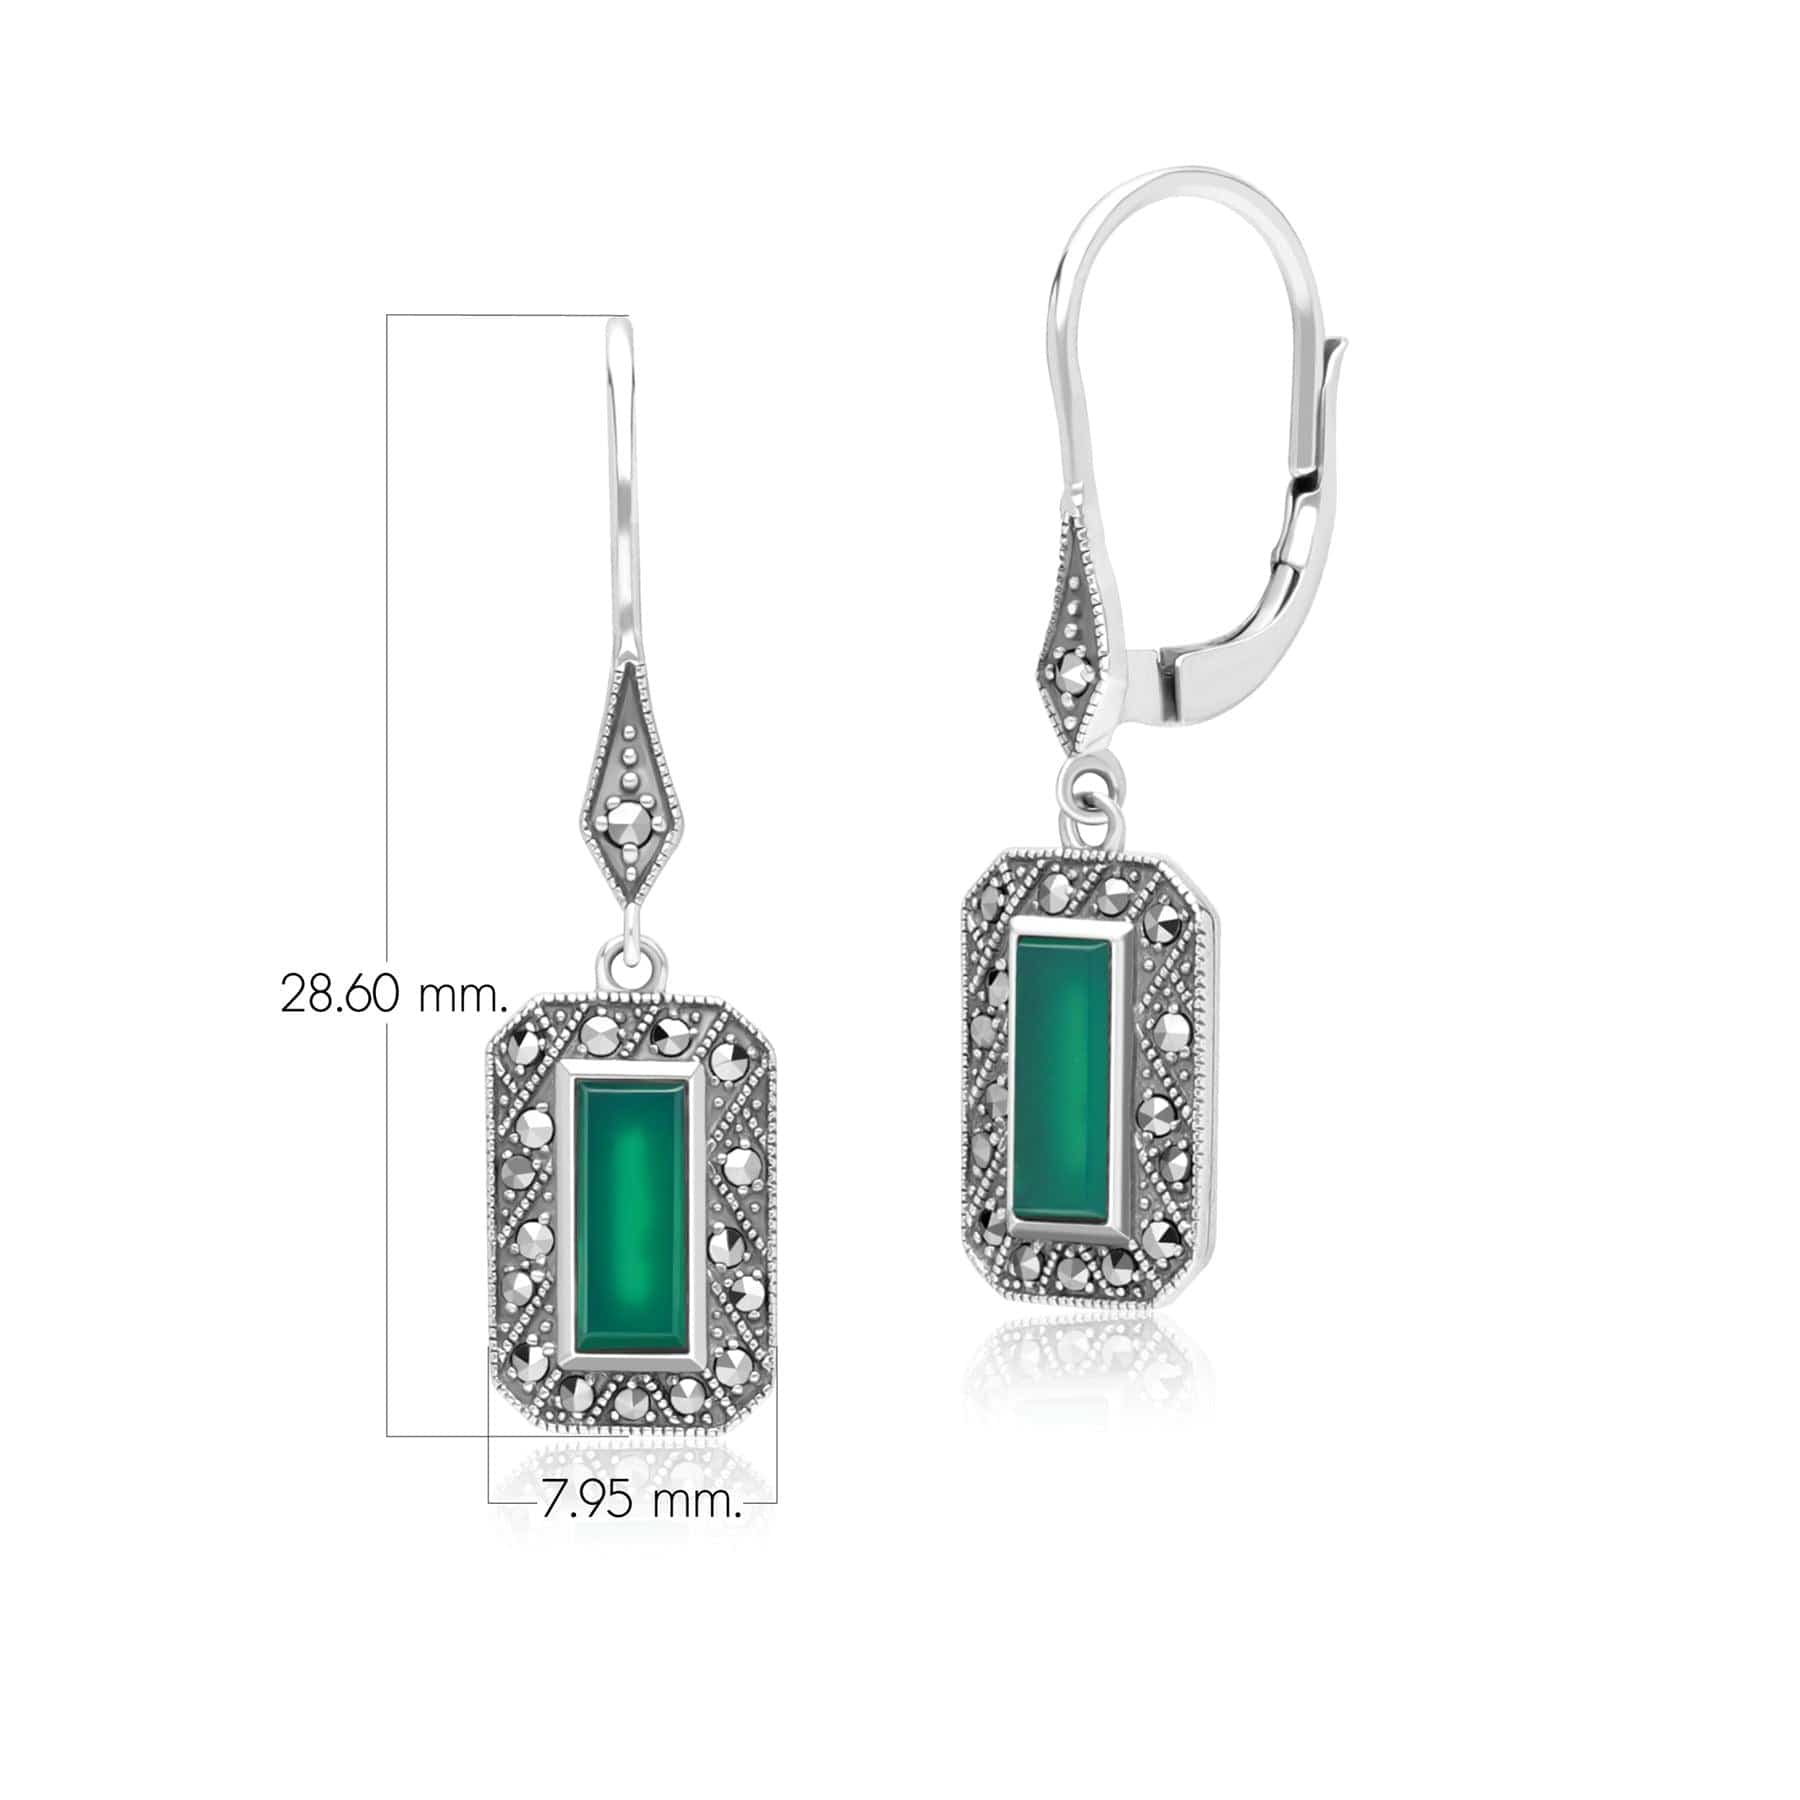 Art Deco Style Rectangle Chalcedony and Marcasite Drop Earrings in Sterling Silver 214E936101925 Dimensions